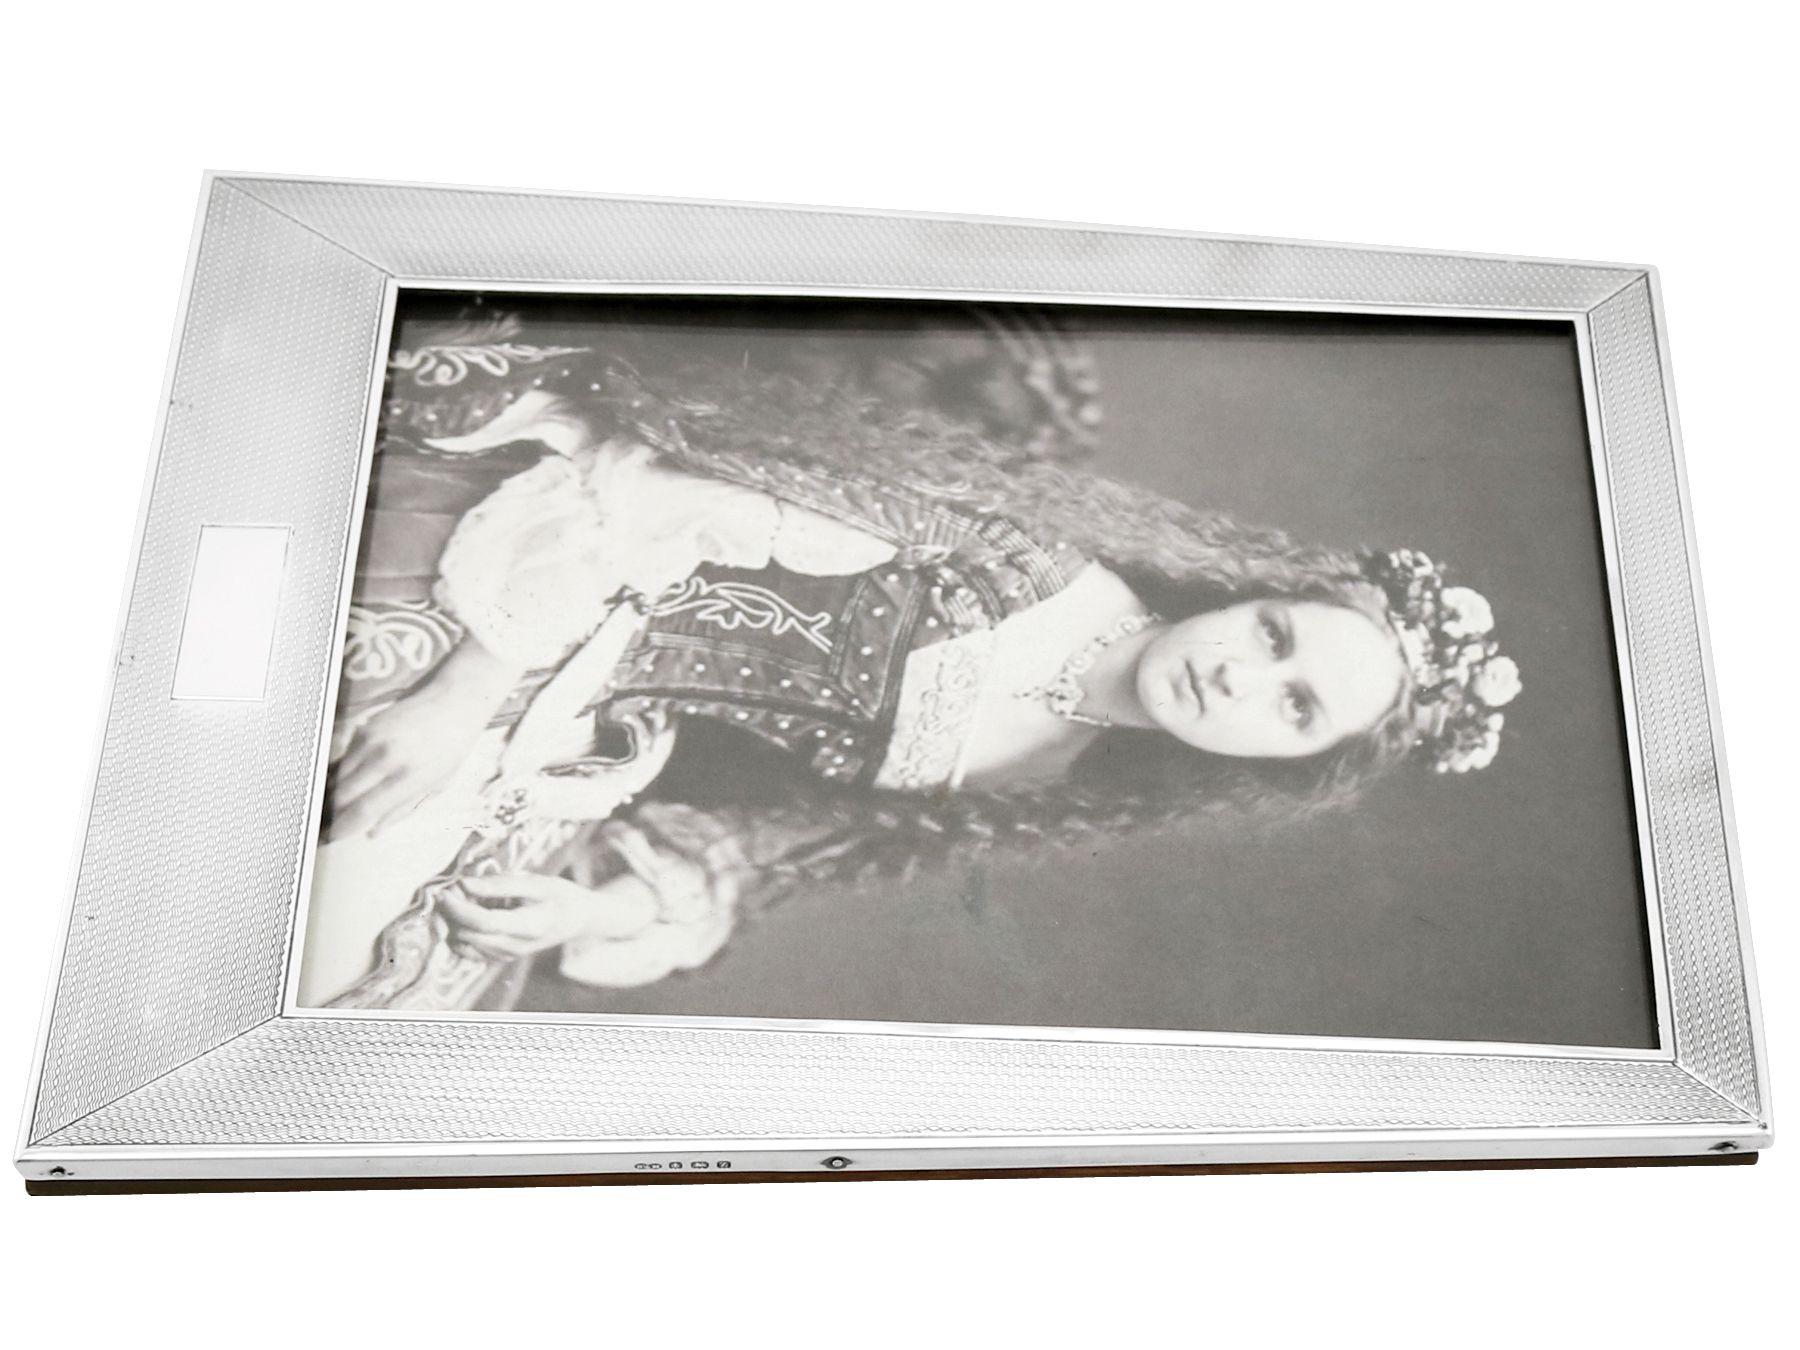 Sanders & Mackenzie 1924 Art Deco Antique Sterling Silver Photograph Frame In Excellent Condition For Sale In Jesmond, Newcastle Upon Tyne